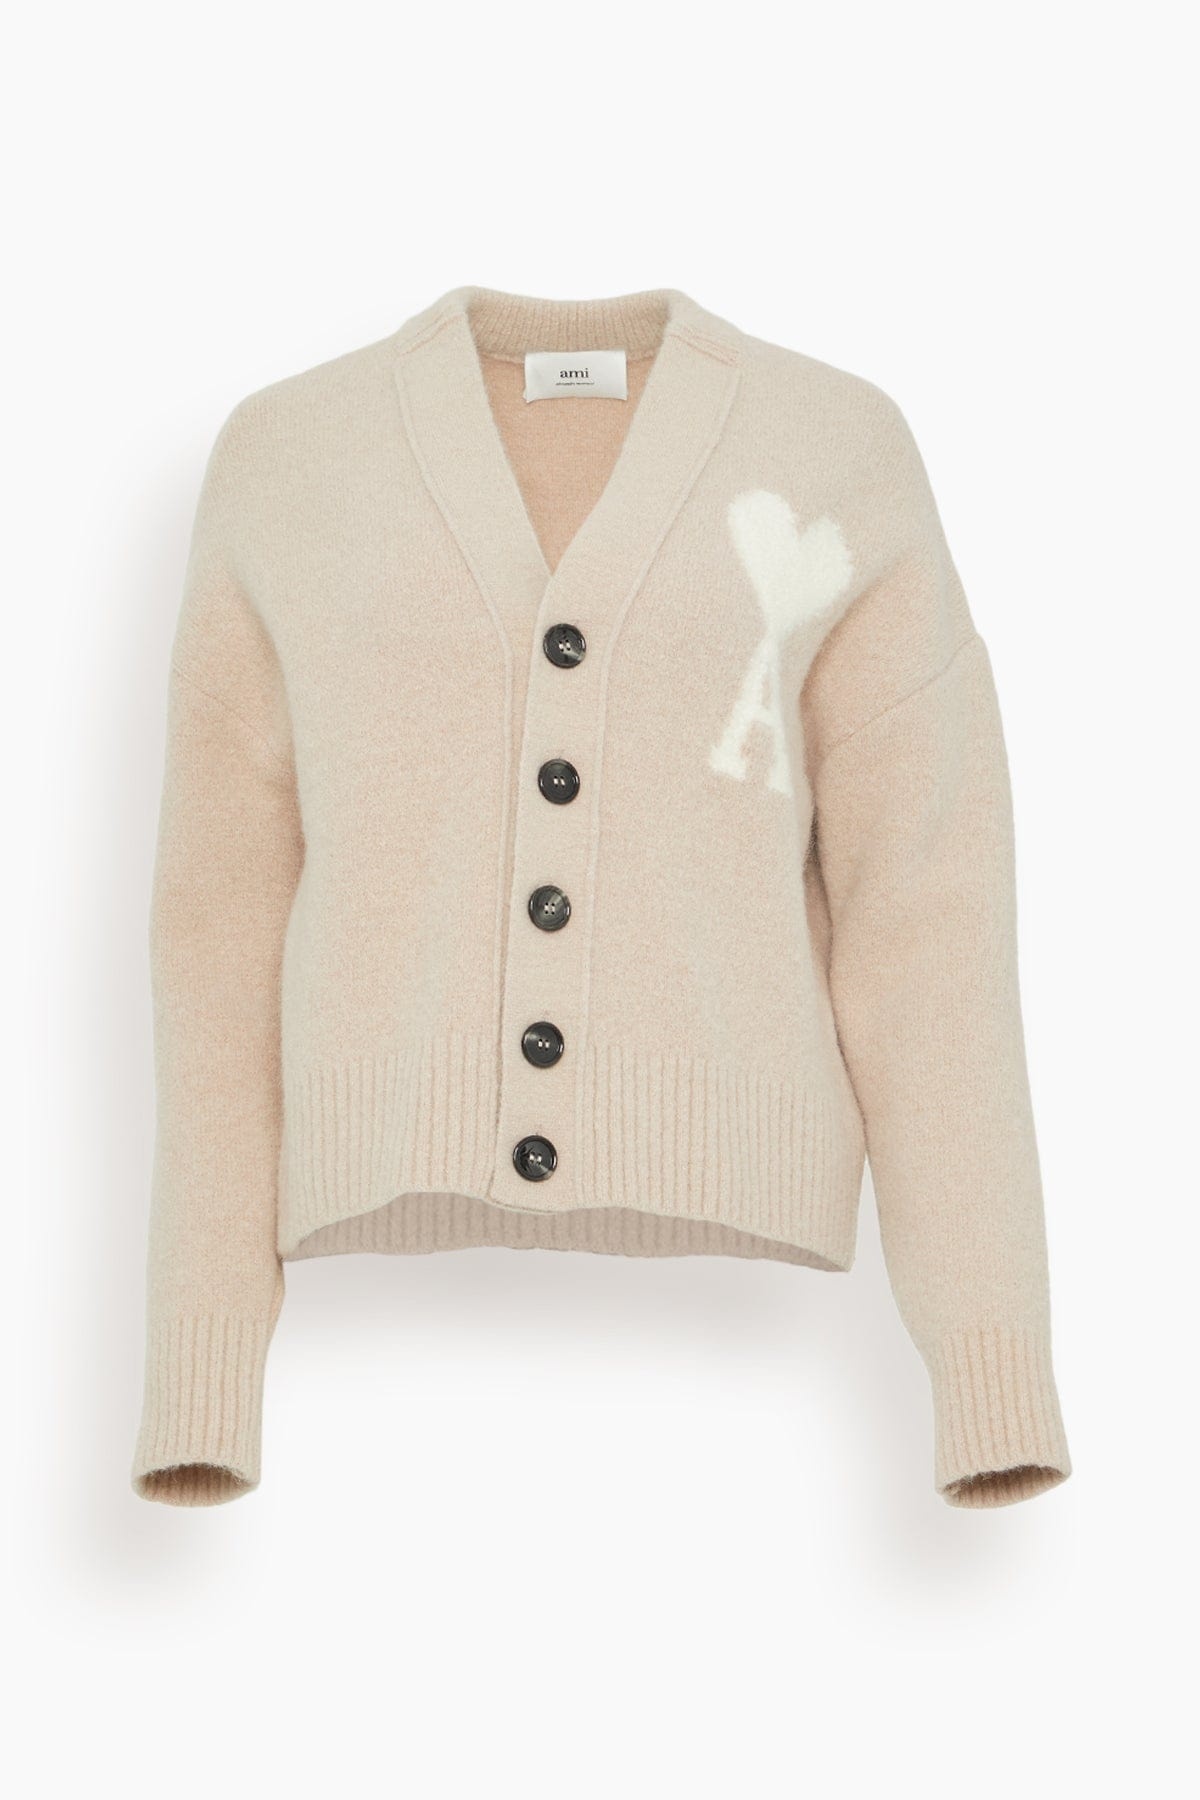 Off White ADC Cardigan in Powder Pink/Ivory - 1